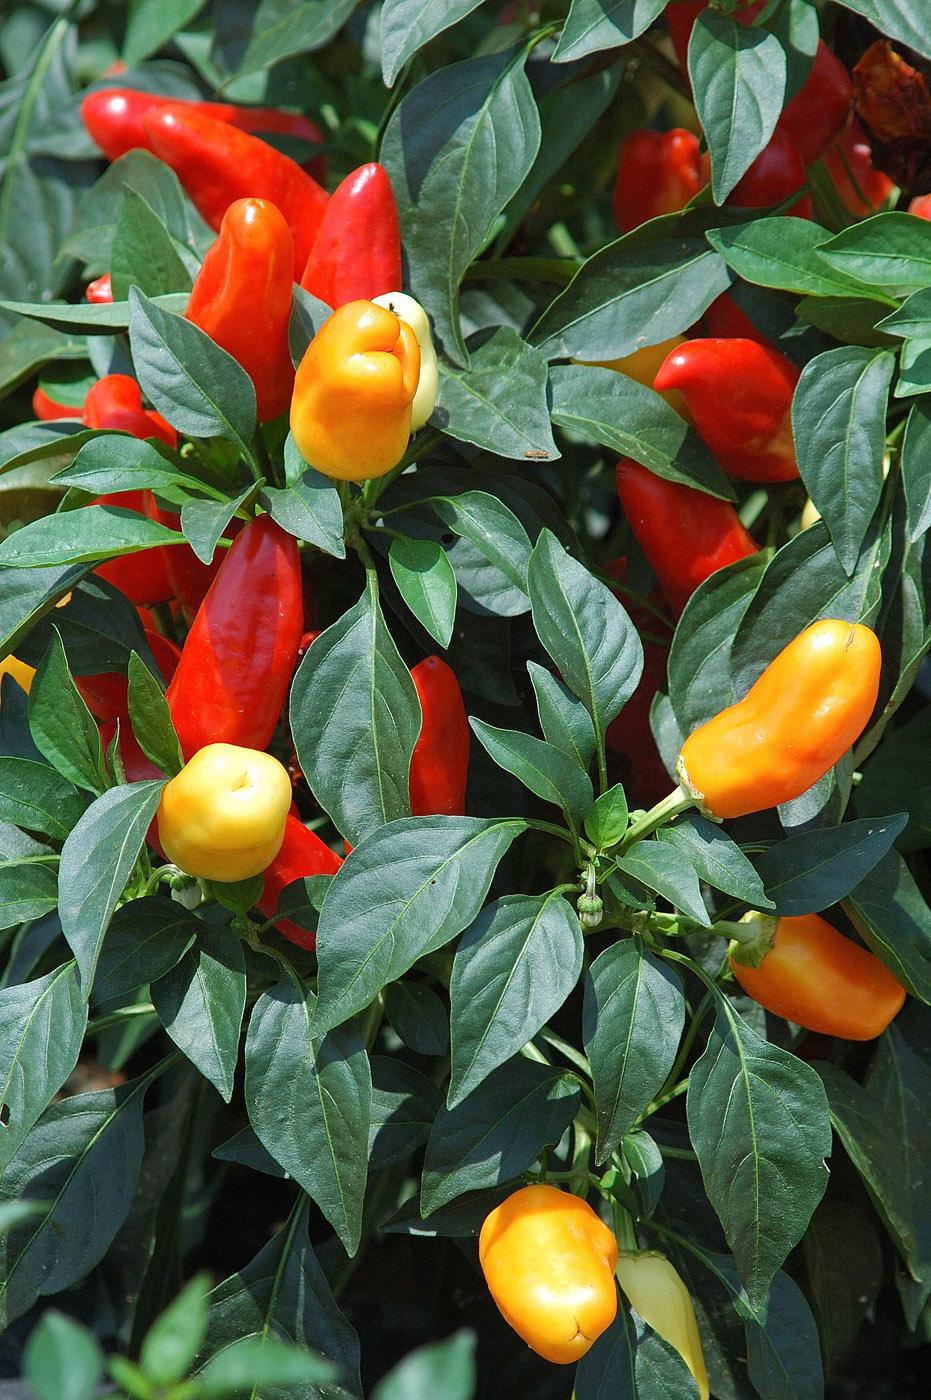 Sweet Pickle pepper has 2-inch-long fruit that resembles the big and bold old-fashioned Christmas tree lights. Its fruit is sweet rather than hot, and the plant loads up with a bounty of red, orange, yellow and purple fruit all at one time.